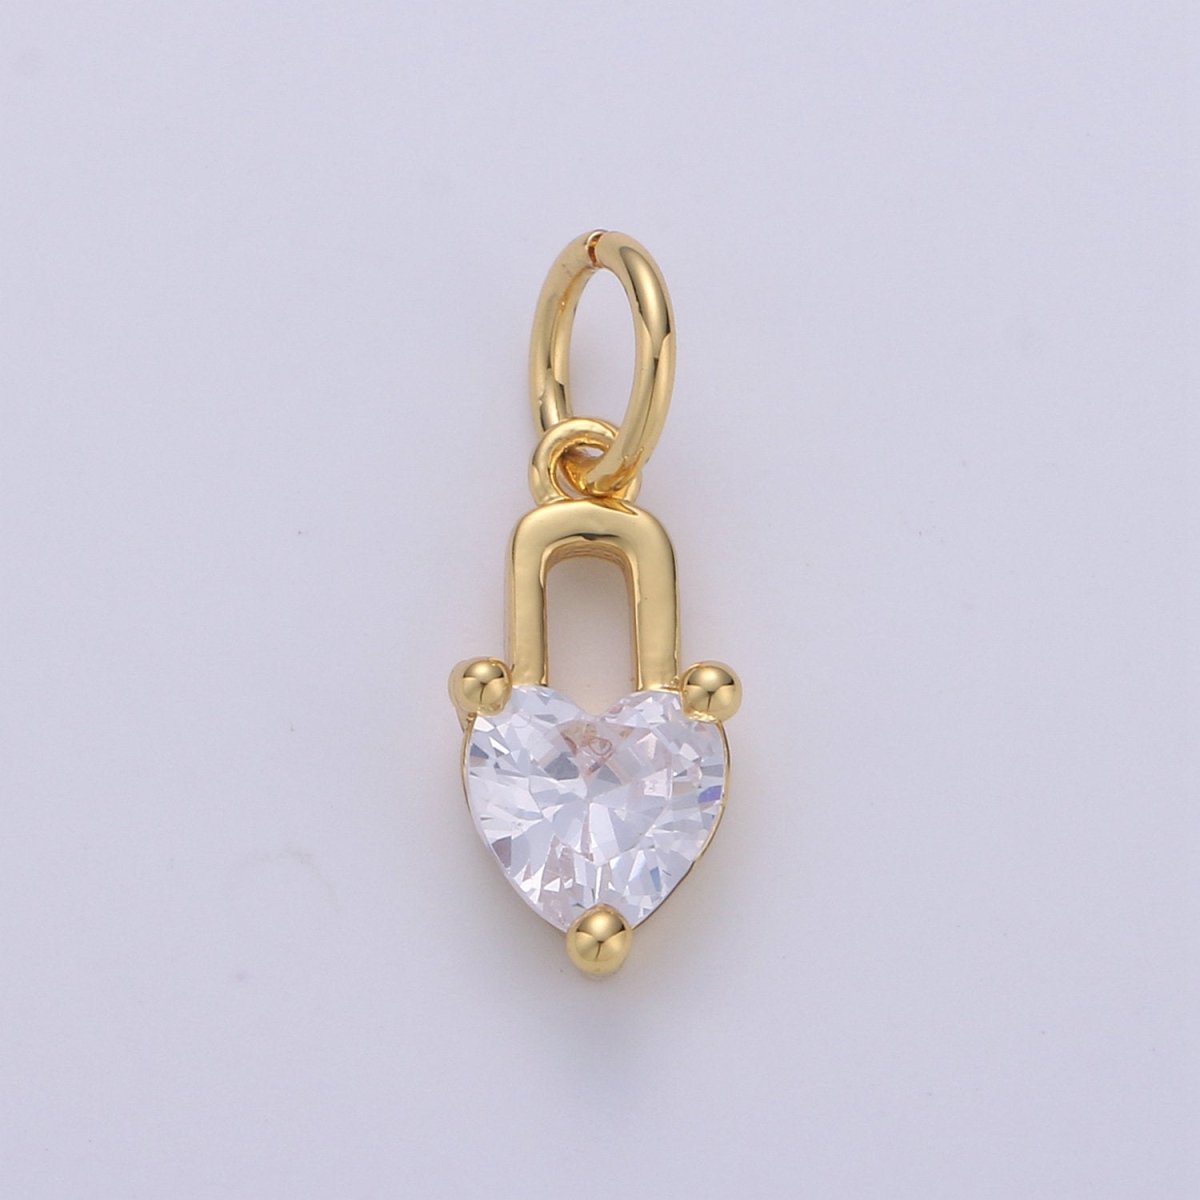 Mini 24k Gold Filled Heart Charms, Gold Filled Love Charm, Cubic Charm ,Gold Love Lock charm Relationship Jewelry Inspired D-563 D-564 - DLUXCA